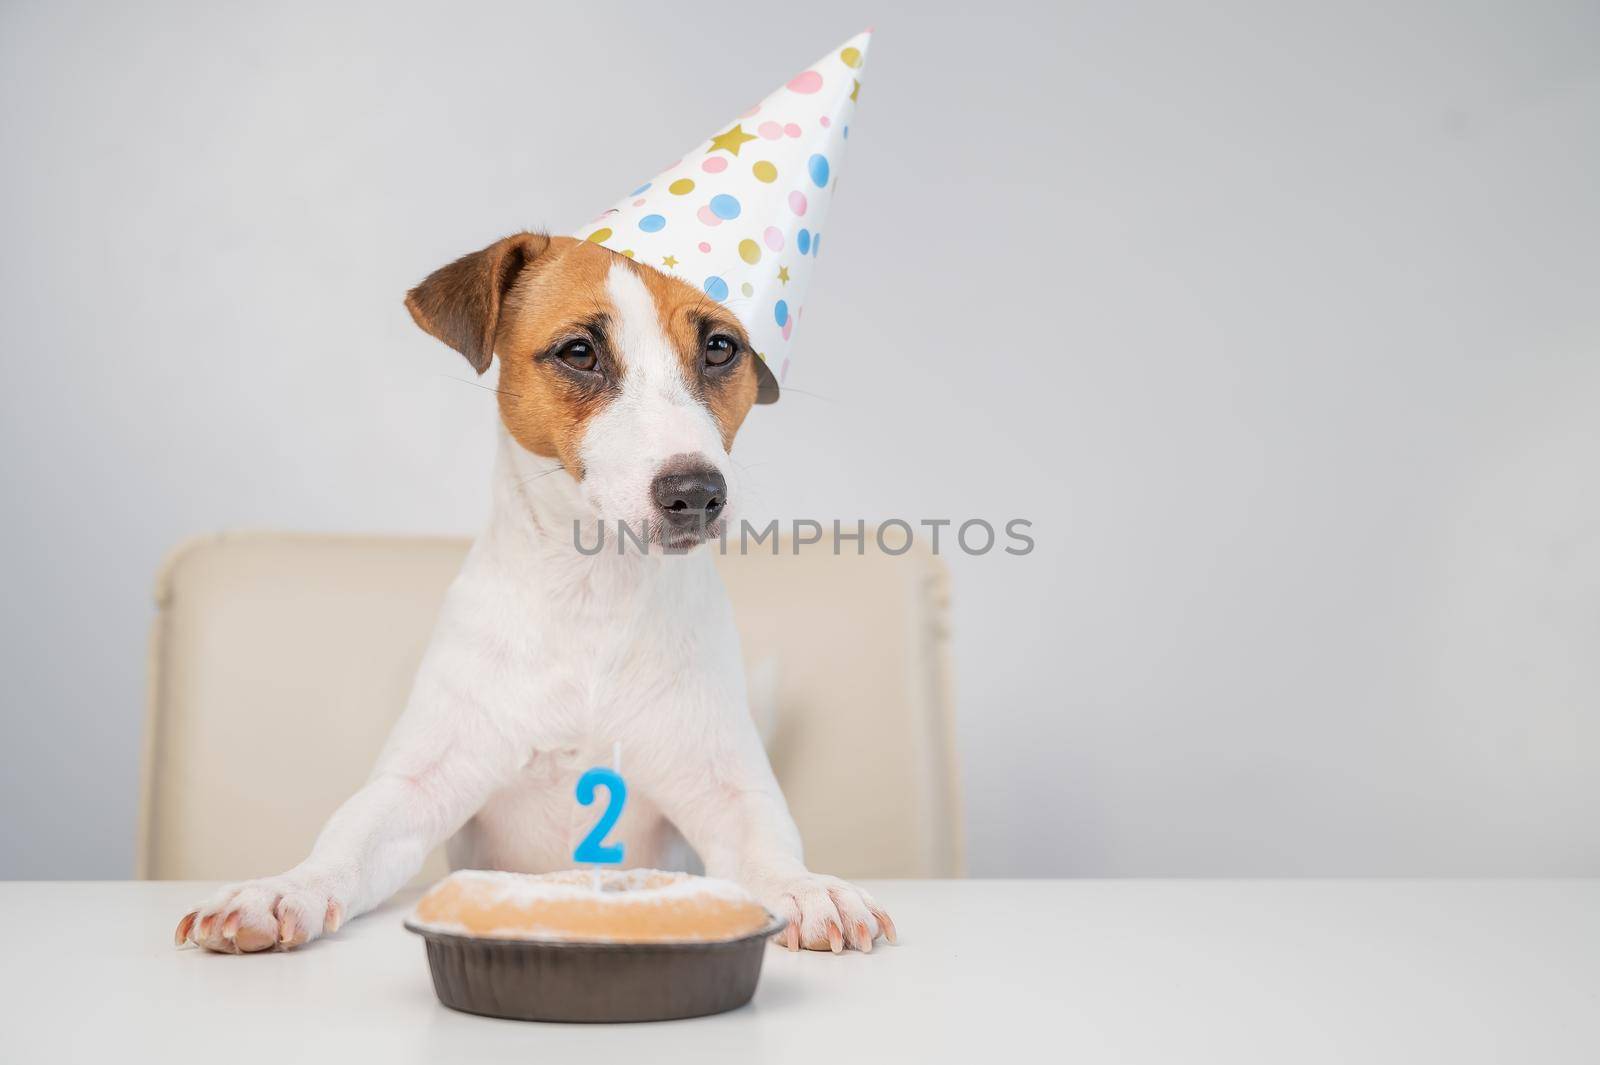 Jack russell terrier in a festive cap by a pie with a candle on a white background. The dog is celebrating its second birthday.